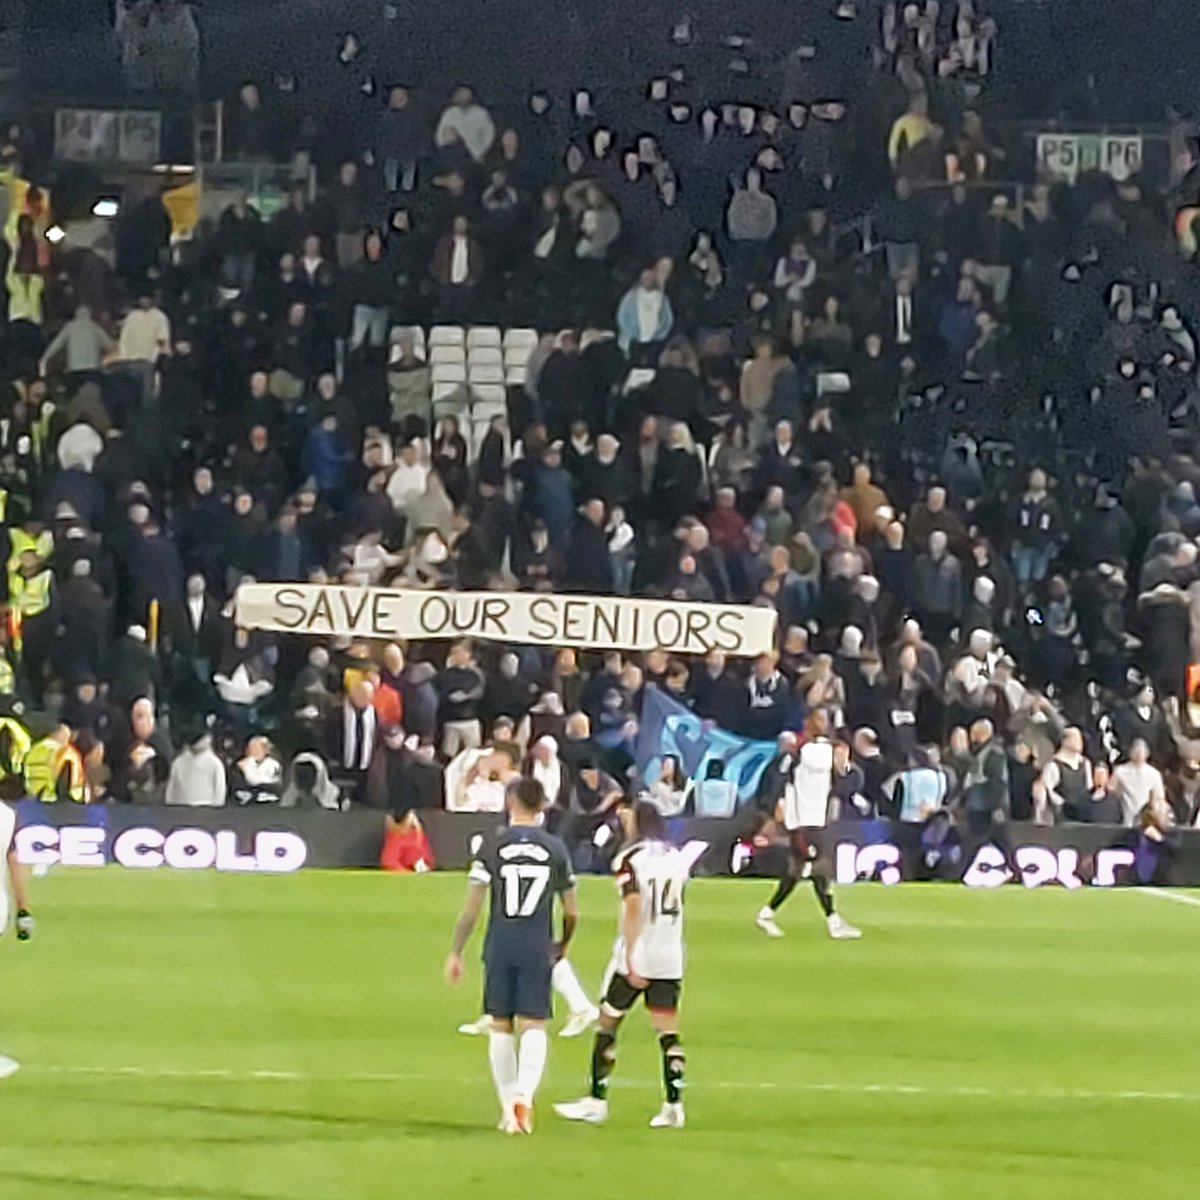 As more and more clubs change their ticket arrangements prompting fears they put profit above fans, we stand in solidarity with Tottenham's @SaveOurSenior66 as they campaign for the reinstatement of senior concessions for their fans, here during our game v Spurs on Saturday. ✊